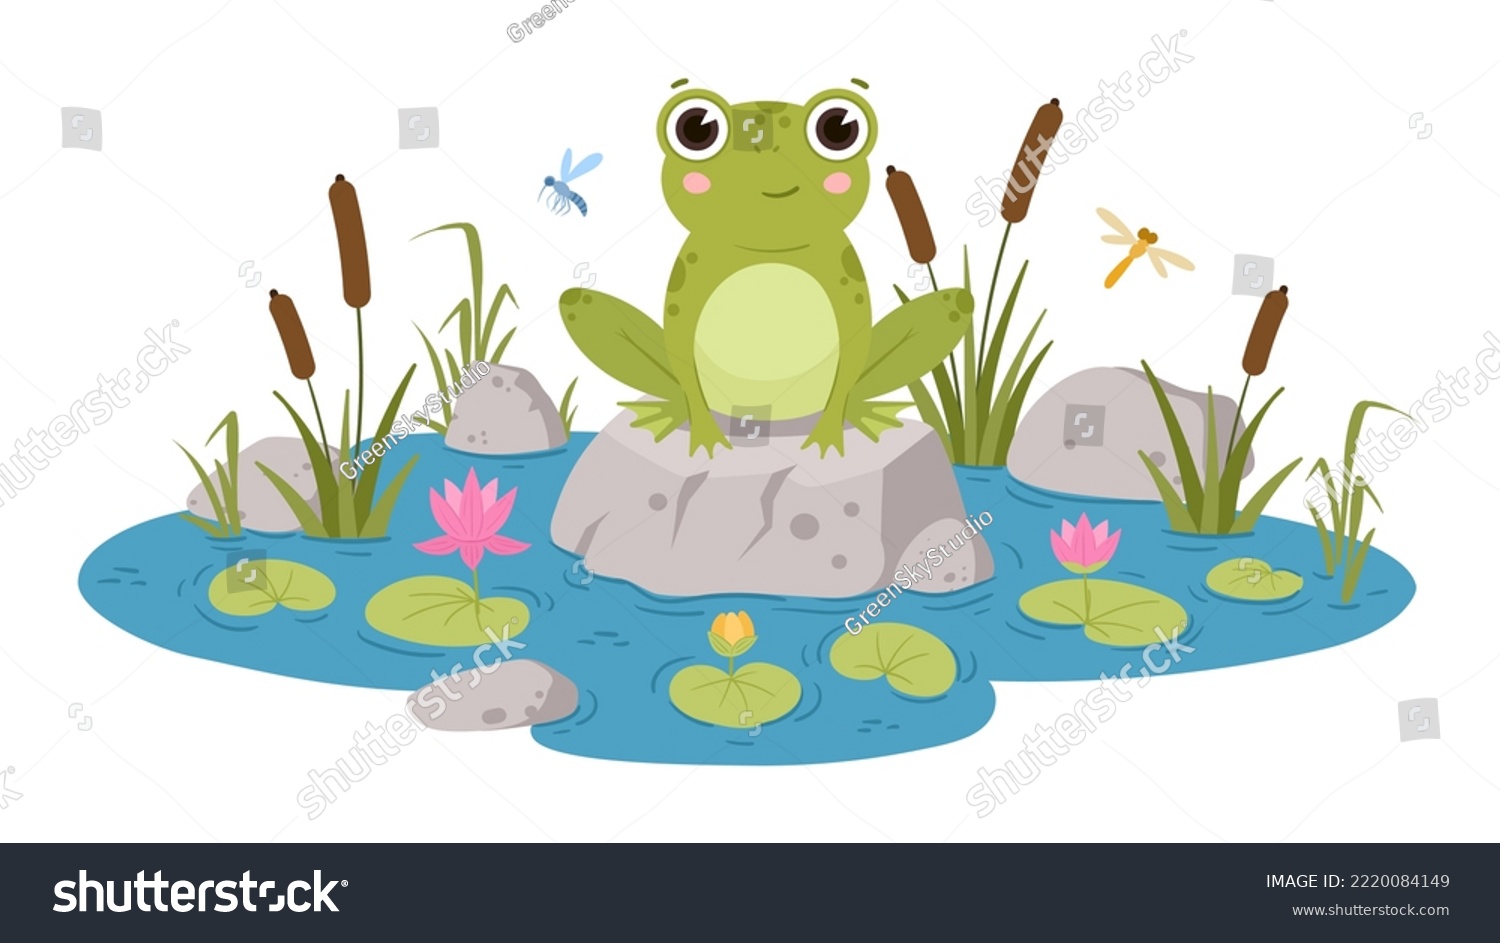 SVG of Cartoon frog sitting in pond, cute amphibia. Green toad in natural habitat, froggy water animal in pond with water lilies and reeds flat vector illustrations. Green frog character svg